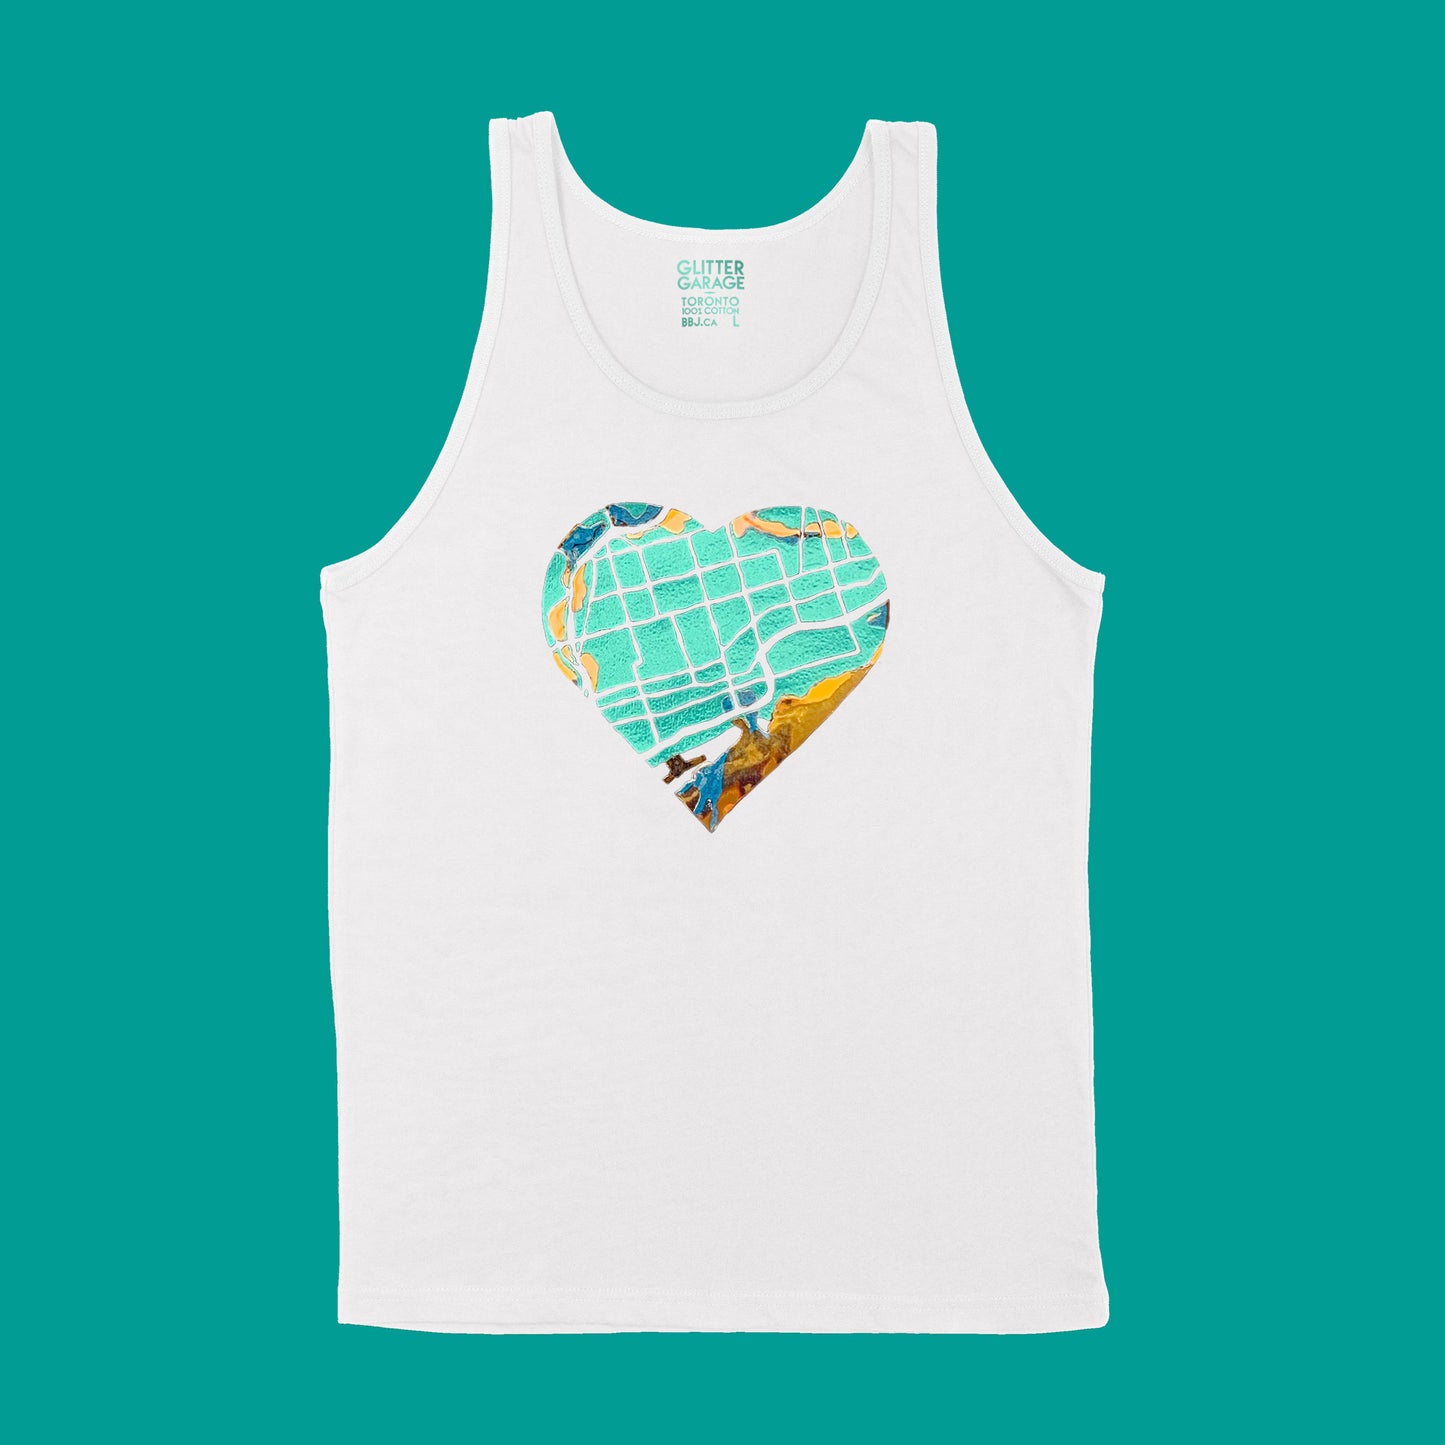 White unisex tank shirt with metallic teal and shiny holographic east-end-map heart, #EastEndLove text on back by BBJ with East End Arts - front view